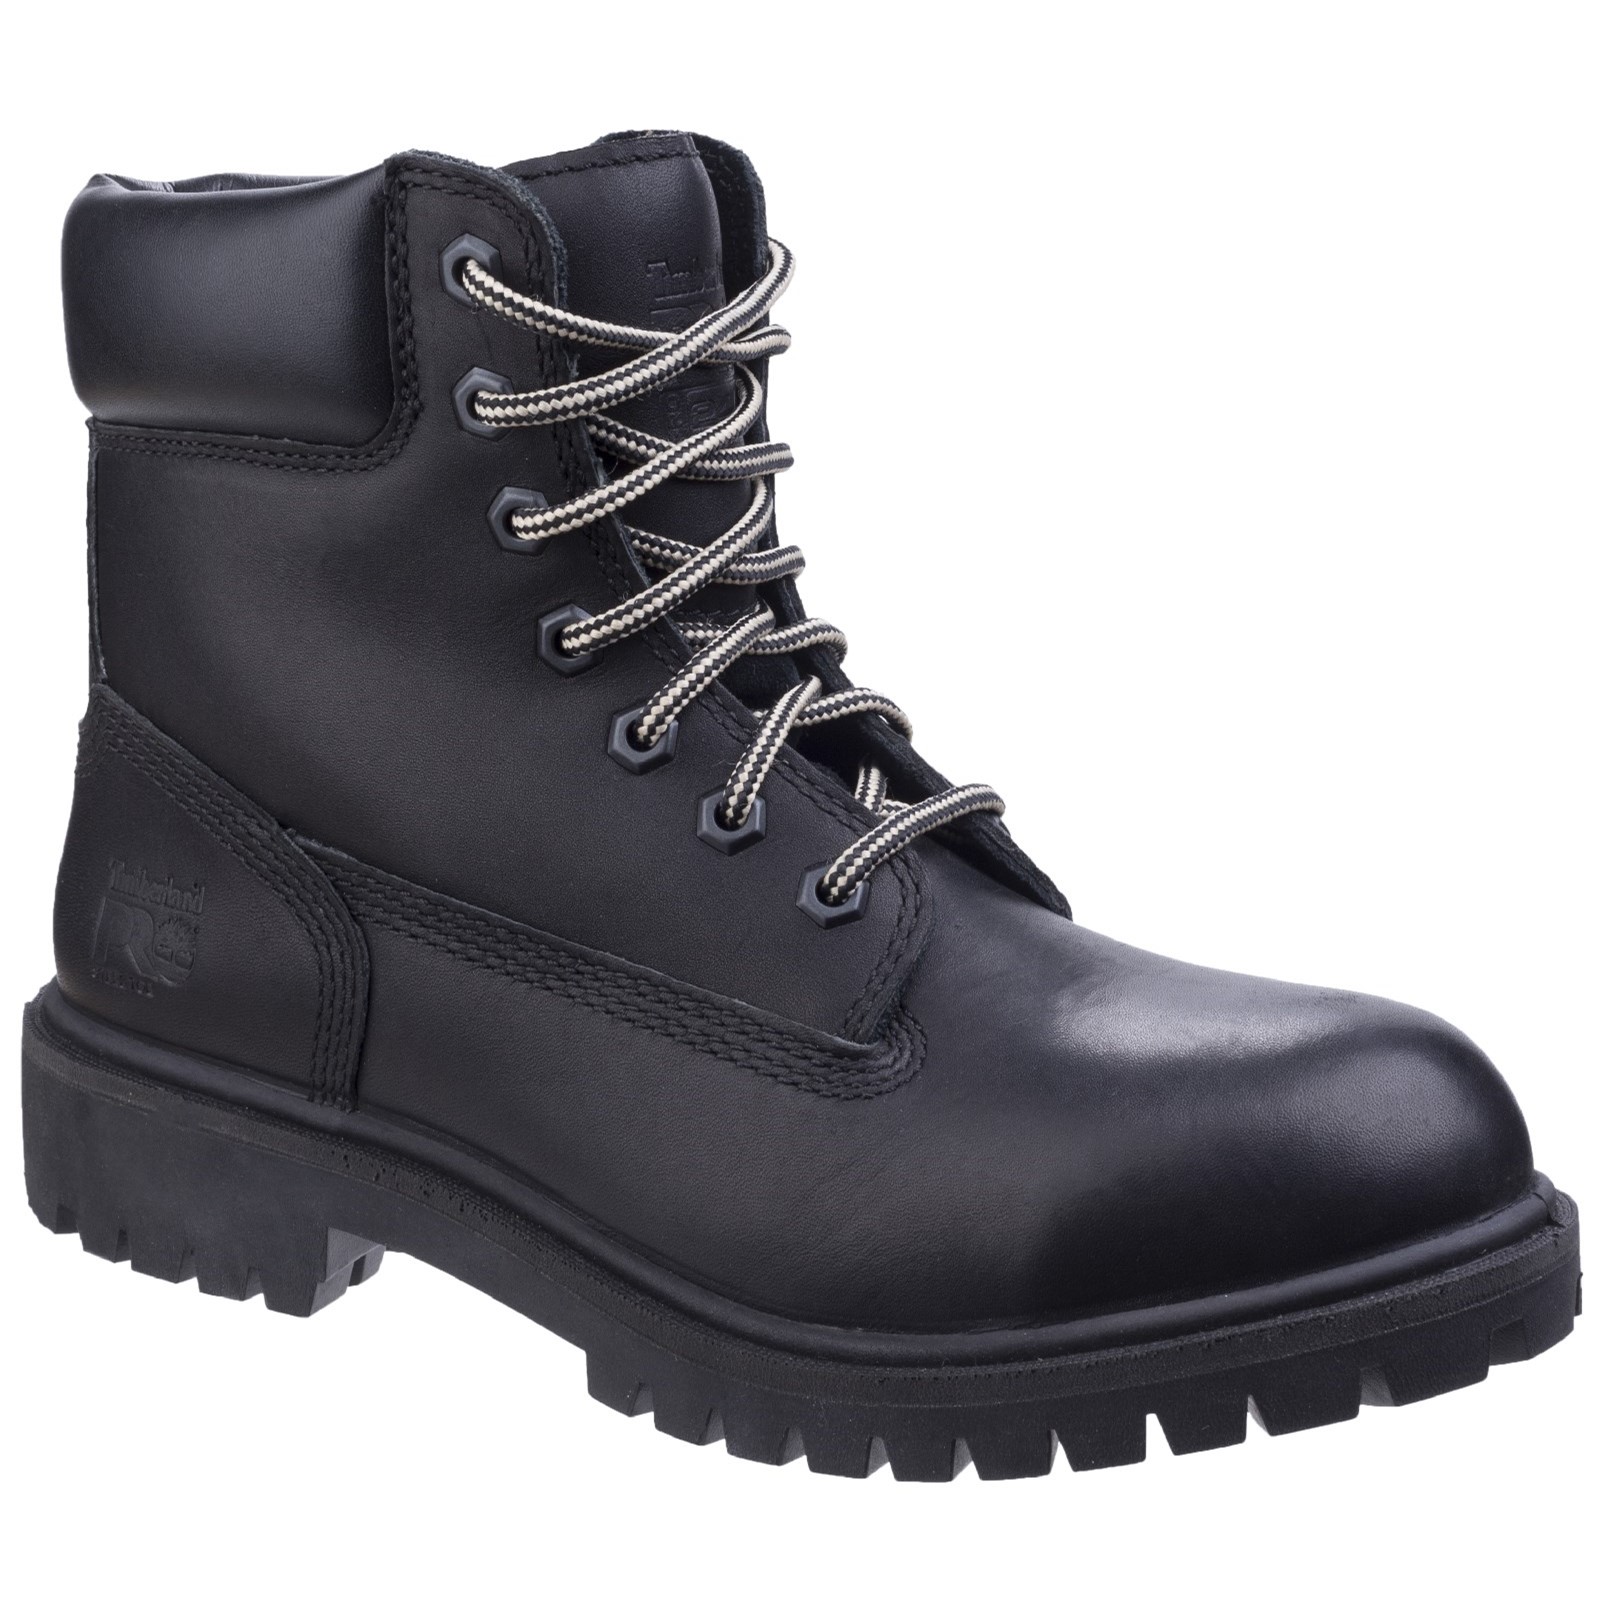 Ladies Safety Boots